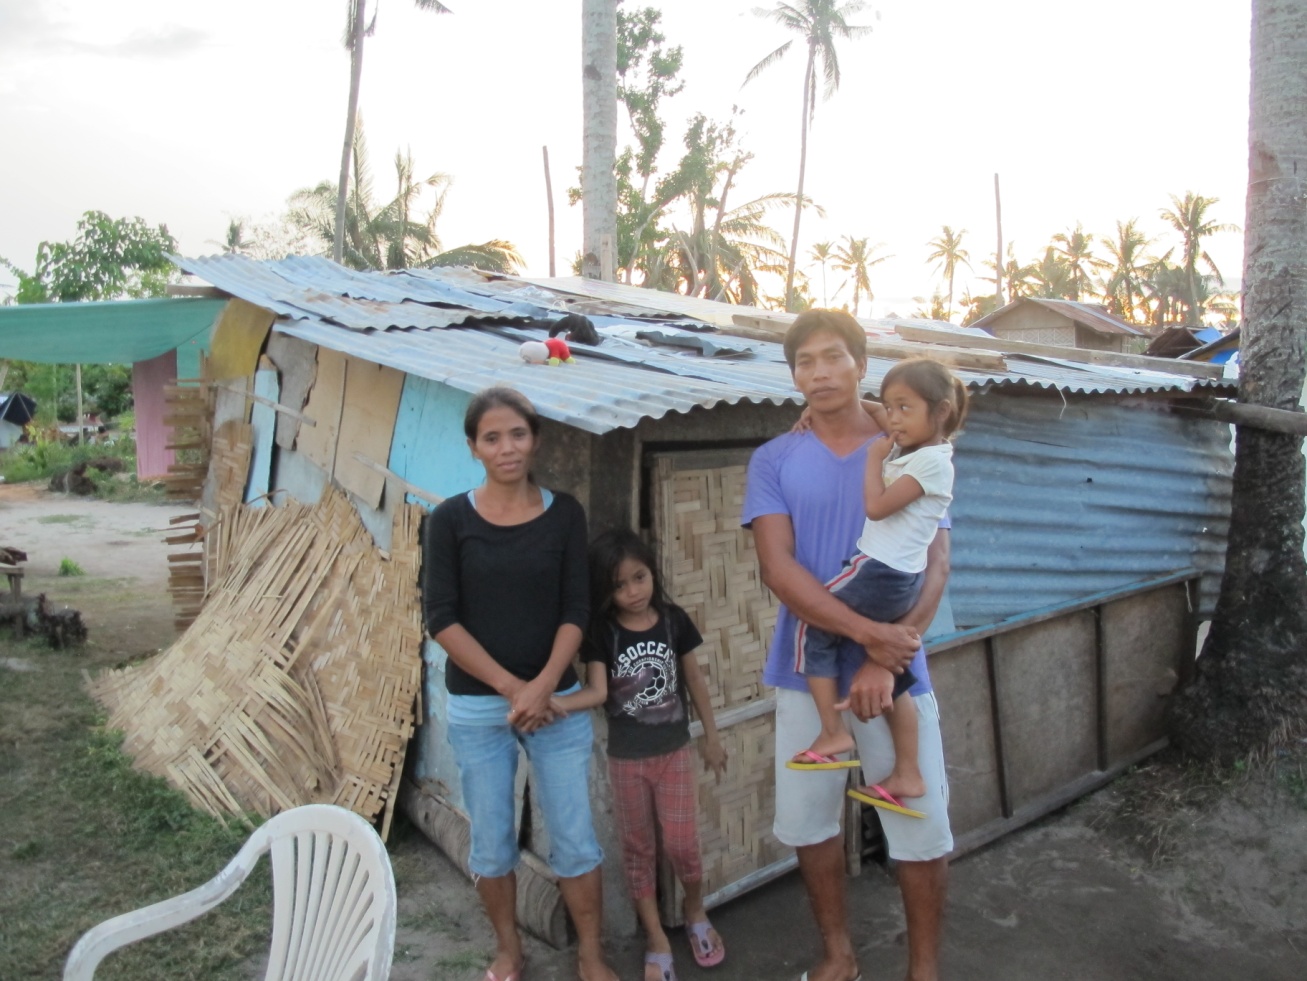 Charis and her family outside their makeshift shelter, in the Philippines